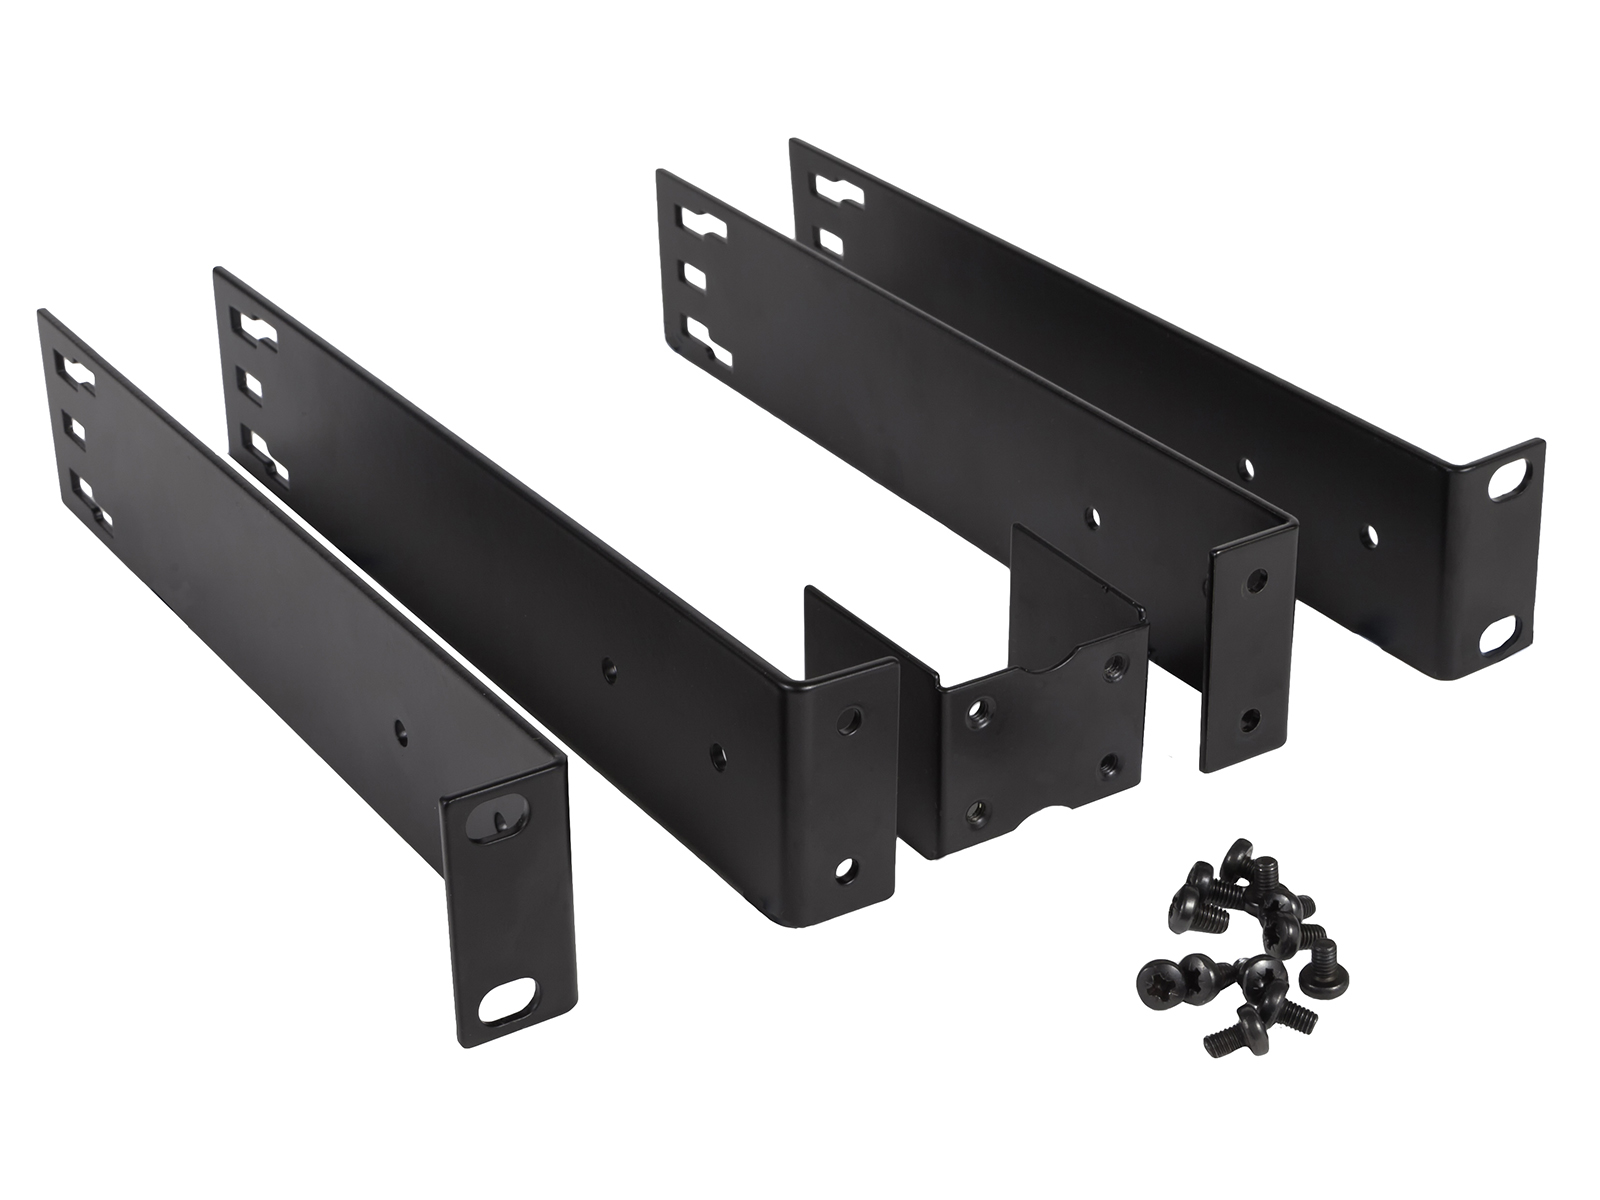 RMK4D-R2 19 inch Rackmount Kit for Two ADDERLink products by Adder